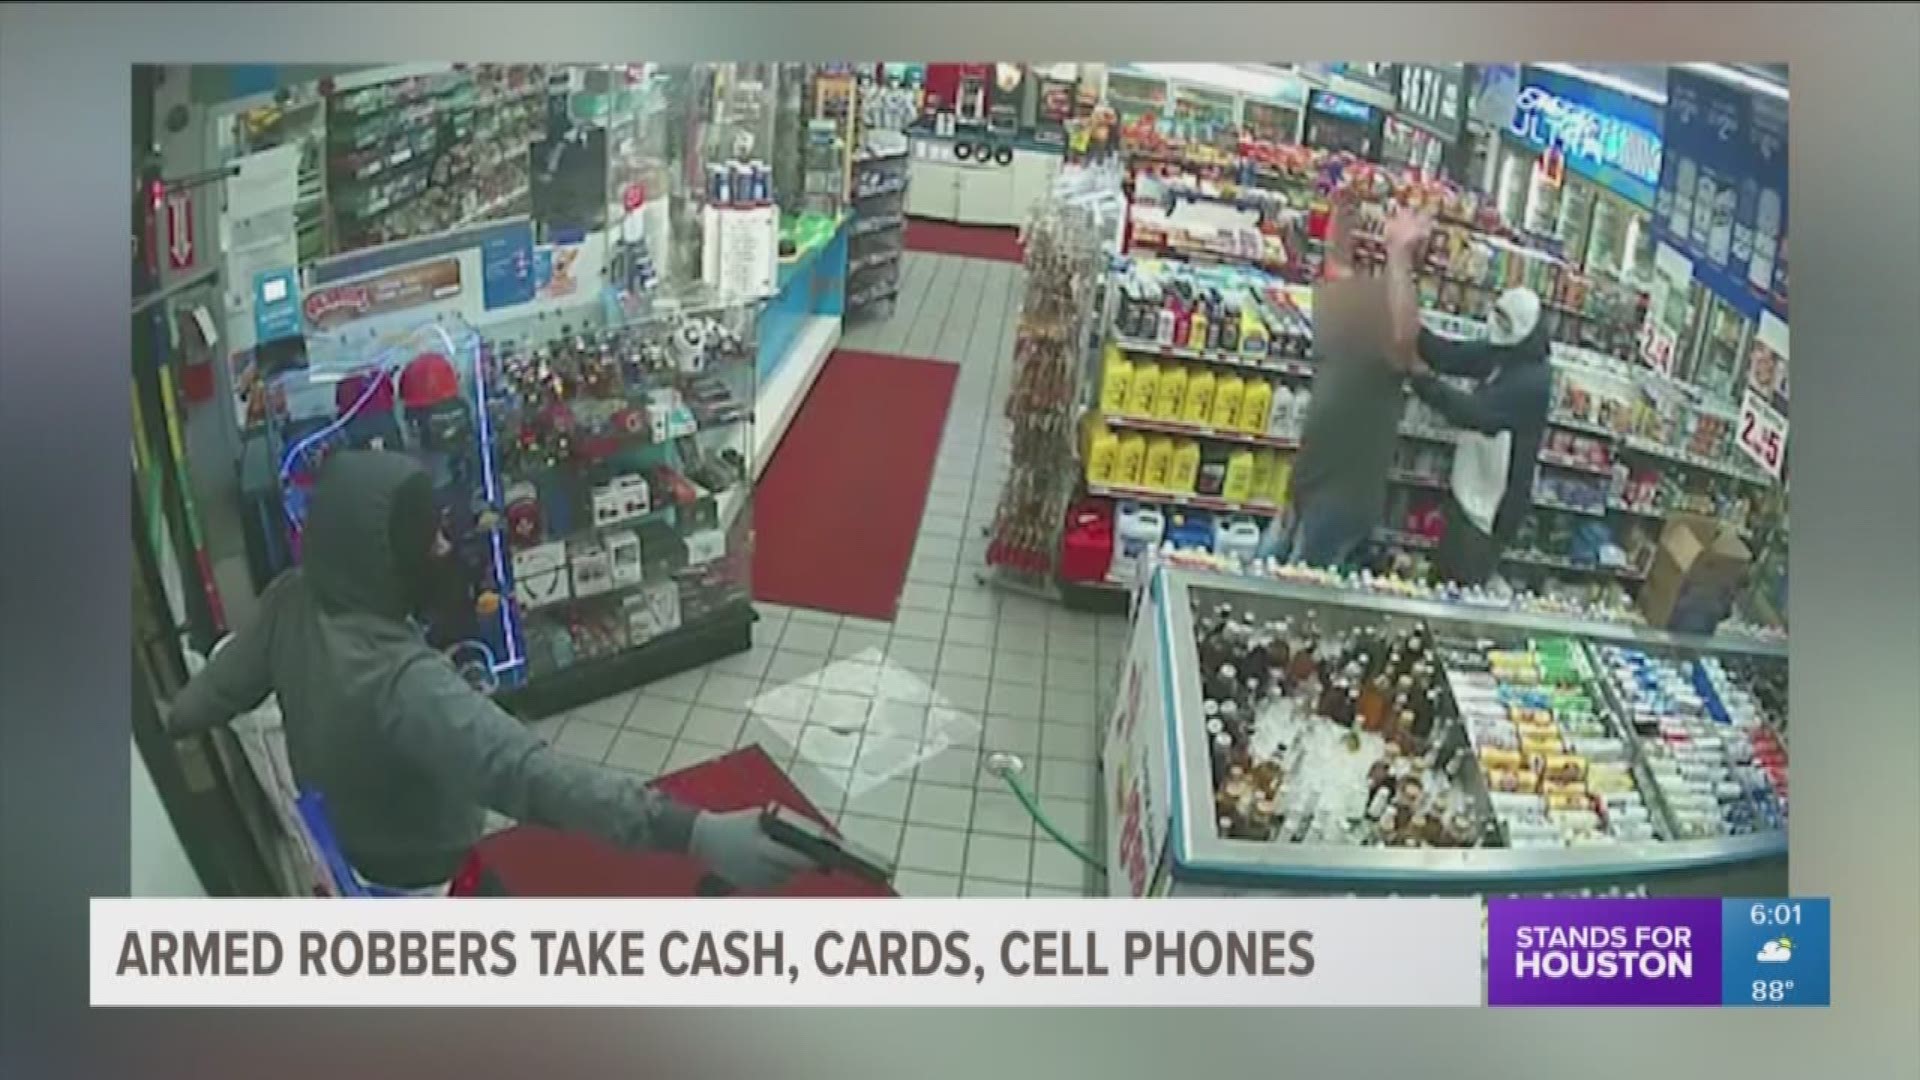 Three men barged into an Exxon gas station on the Eastex Freeway in north Houston back in July. They took cash, cards and cell phones and forced the cashier to empty the register. 